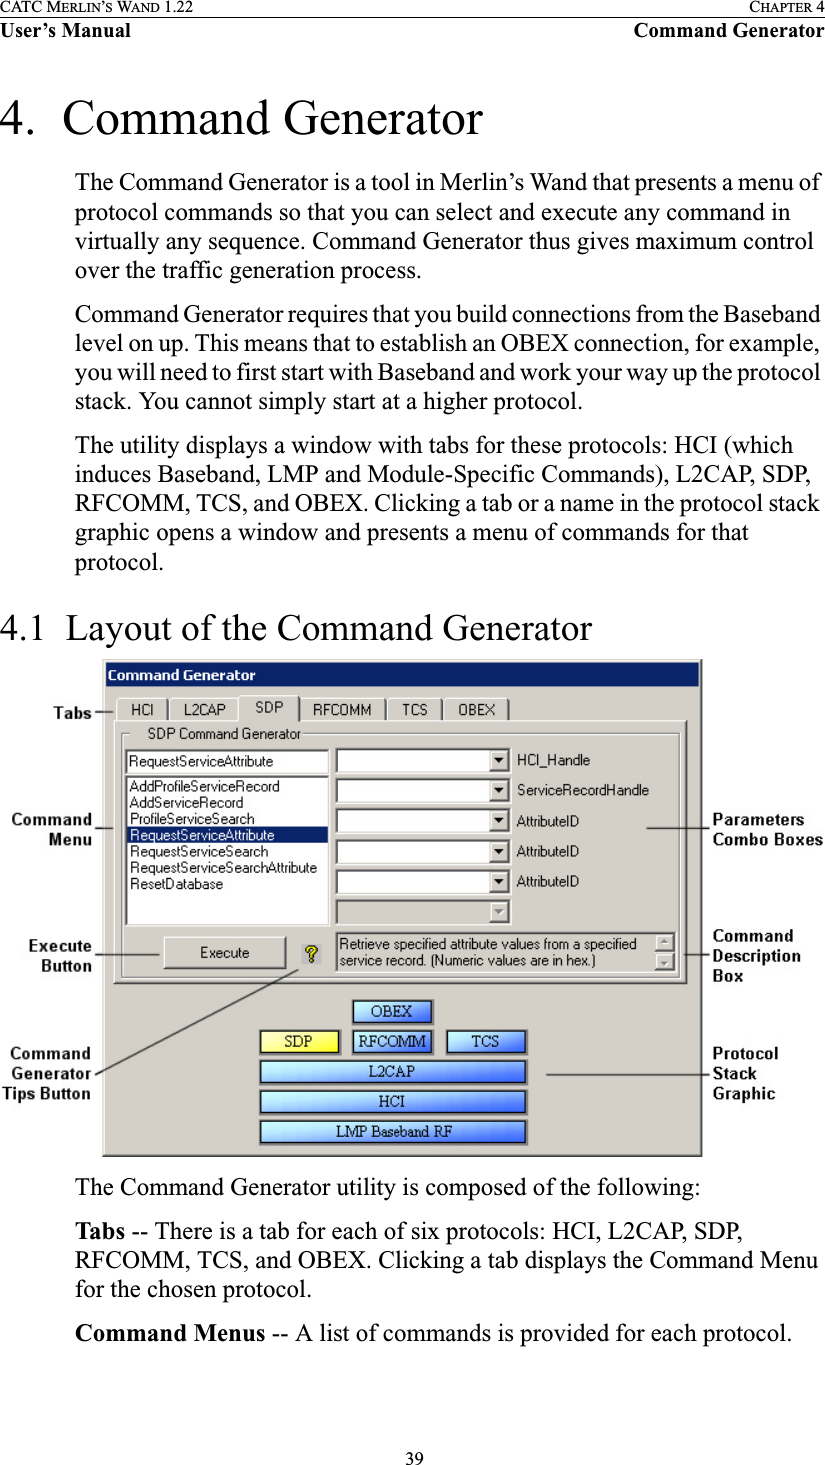  39CATC MERLIN’S WAND 1.22 CHAPTER 4User’s Manual Command Generator4.  Command GeneratorThe Command Generator is a tool in Merlin’s Wand that presents a menu of protocol commands so that you can select and execute any command in virtually any sequence. Command Generator thus gives maximum control over the traffic generation process. Command Generator requires that you build connections from the Baseband level on up. This means that to establish an OBEX connection, for example, you will need to first start with Baseband and work your way up the protocol stack. You cannot simply start at a higher protocol. The utility displays a window with tabs for these protocols: HCI (which induces Baseband, LMP and Module-Specific Commands), L2CAP, SDP, RFCOMM, TCS, and OBEX. Clicking a tab or a name in the protocol stack graphic opens a window and presents a menu of commands for that protocol.4.1  Layout of the Command GeneratorThe Command Generator utility is composed of the following:Tabs -- There is a tab for each of six protocols: HCI, L2CAP, SDP, RFCOMM, TCS, and OBEX. Clicking a tab displays the Command Menu for the chosen protocol.Command Menus -- A list of commands is provided for each protocol.